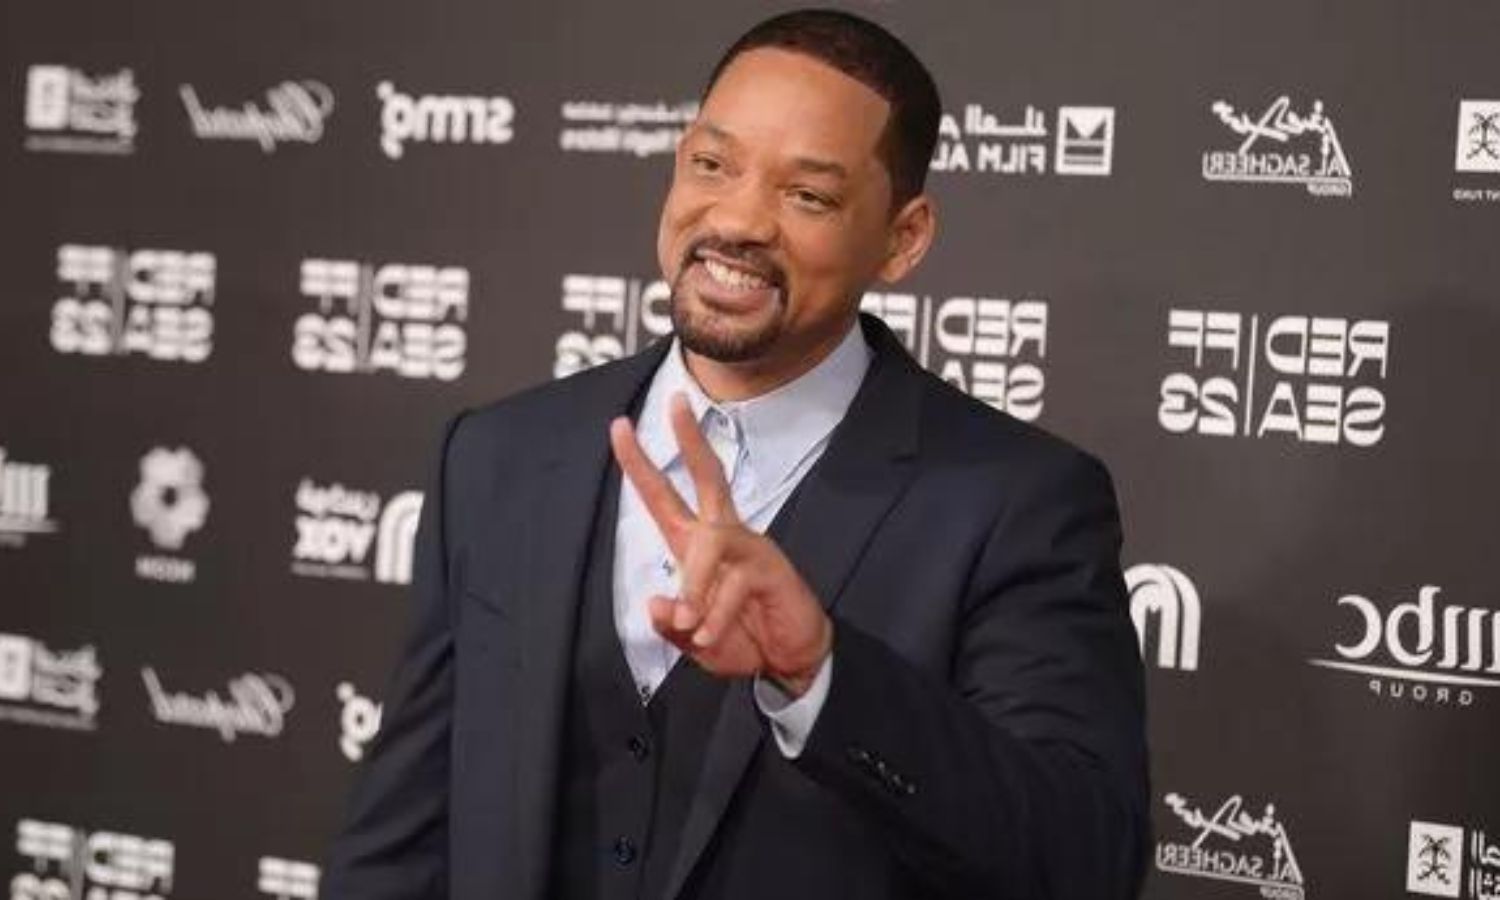 Will Smith Says He's 'Deeply Human,' Reflects on Recent 'Adversities'